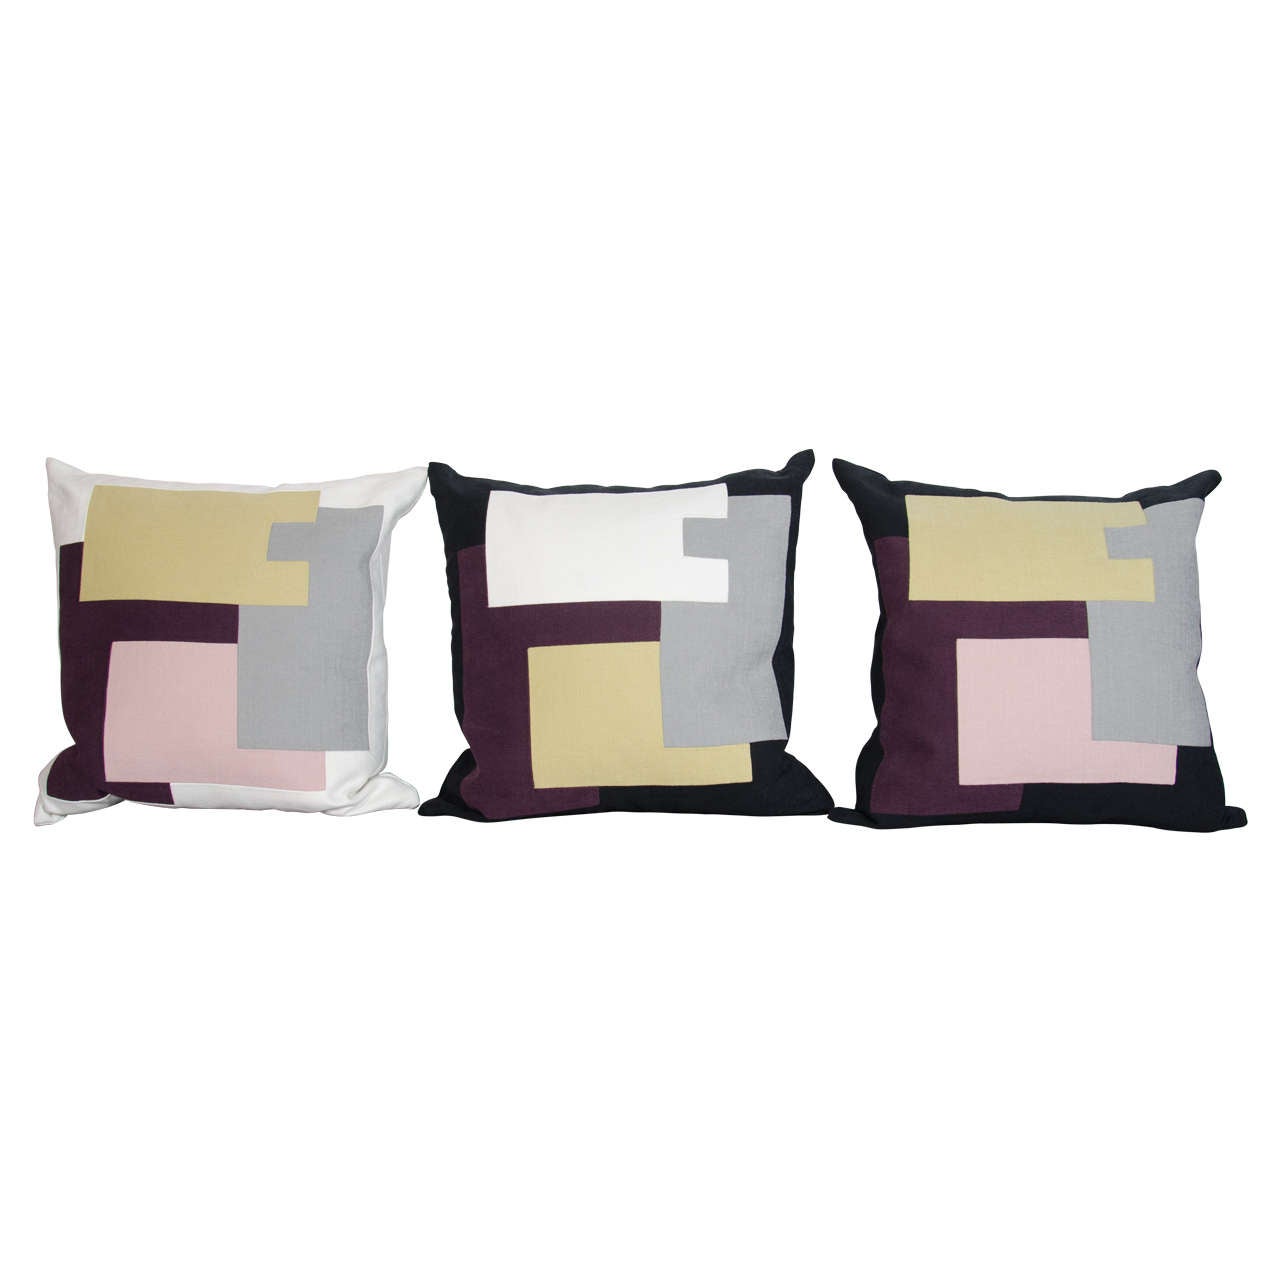 Couture throw pillows by Arguello Casa with abstract designs, inspired by the architectural skyline of New York City. Individually handcrafted in New York , culminating in day long stitching process, and using the finest of Italian linens. In hues